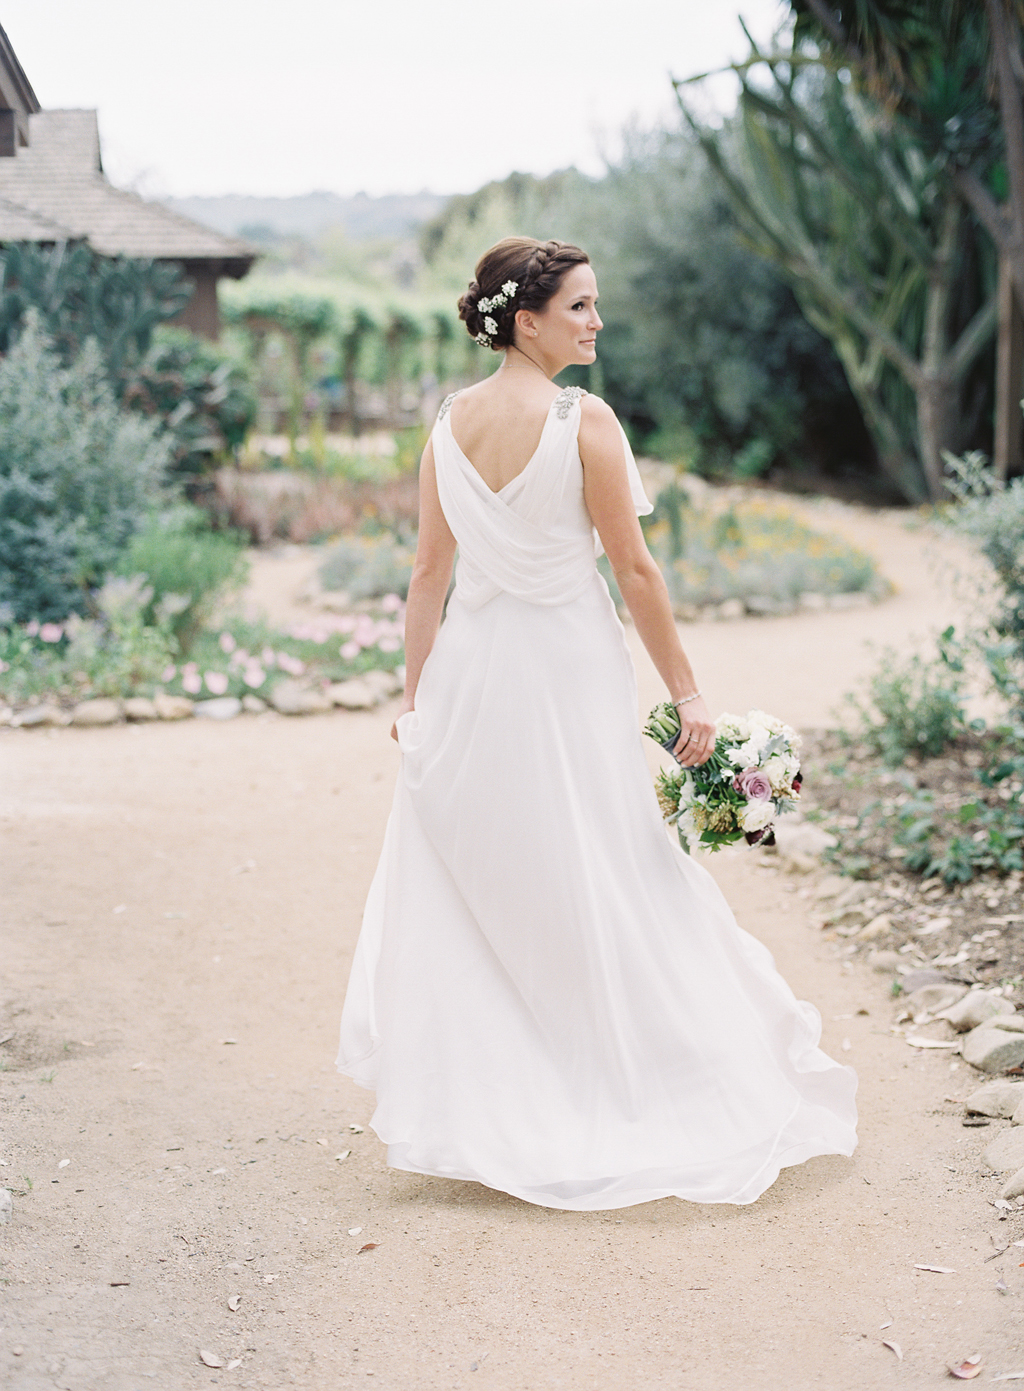 a film photography portrait of a bride on her wedding day in Orange County